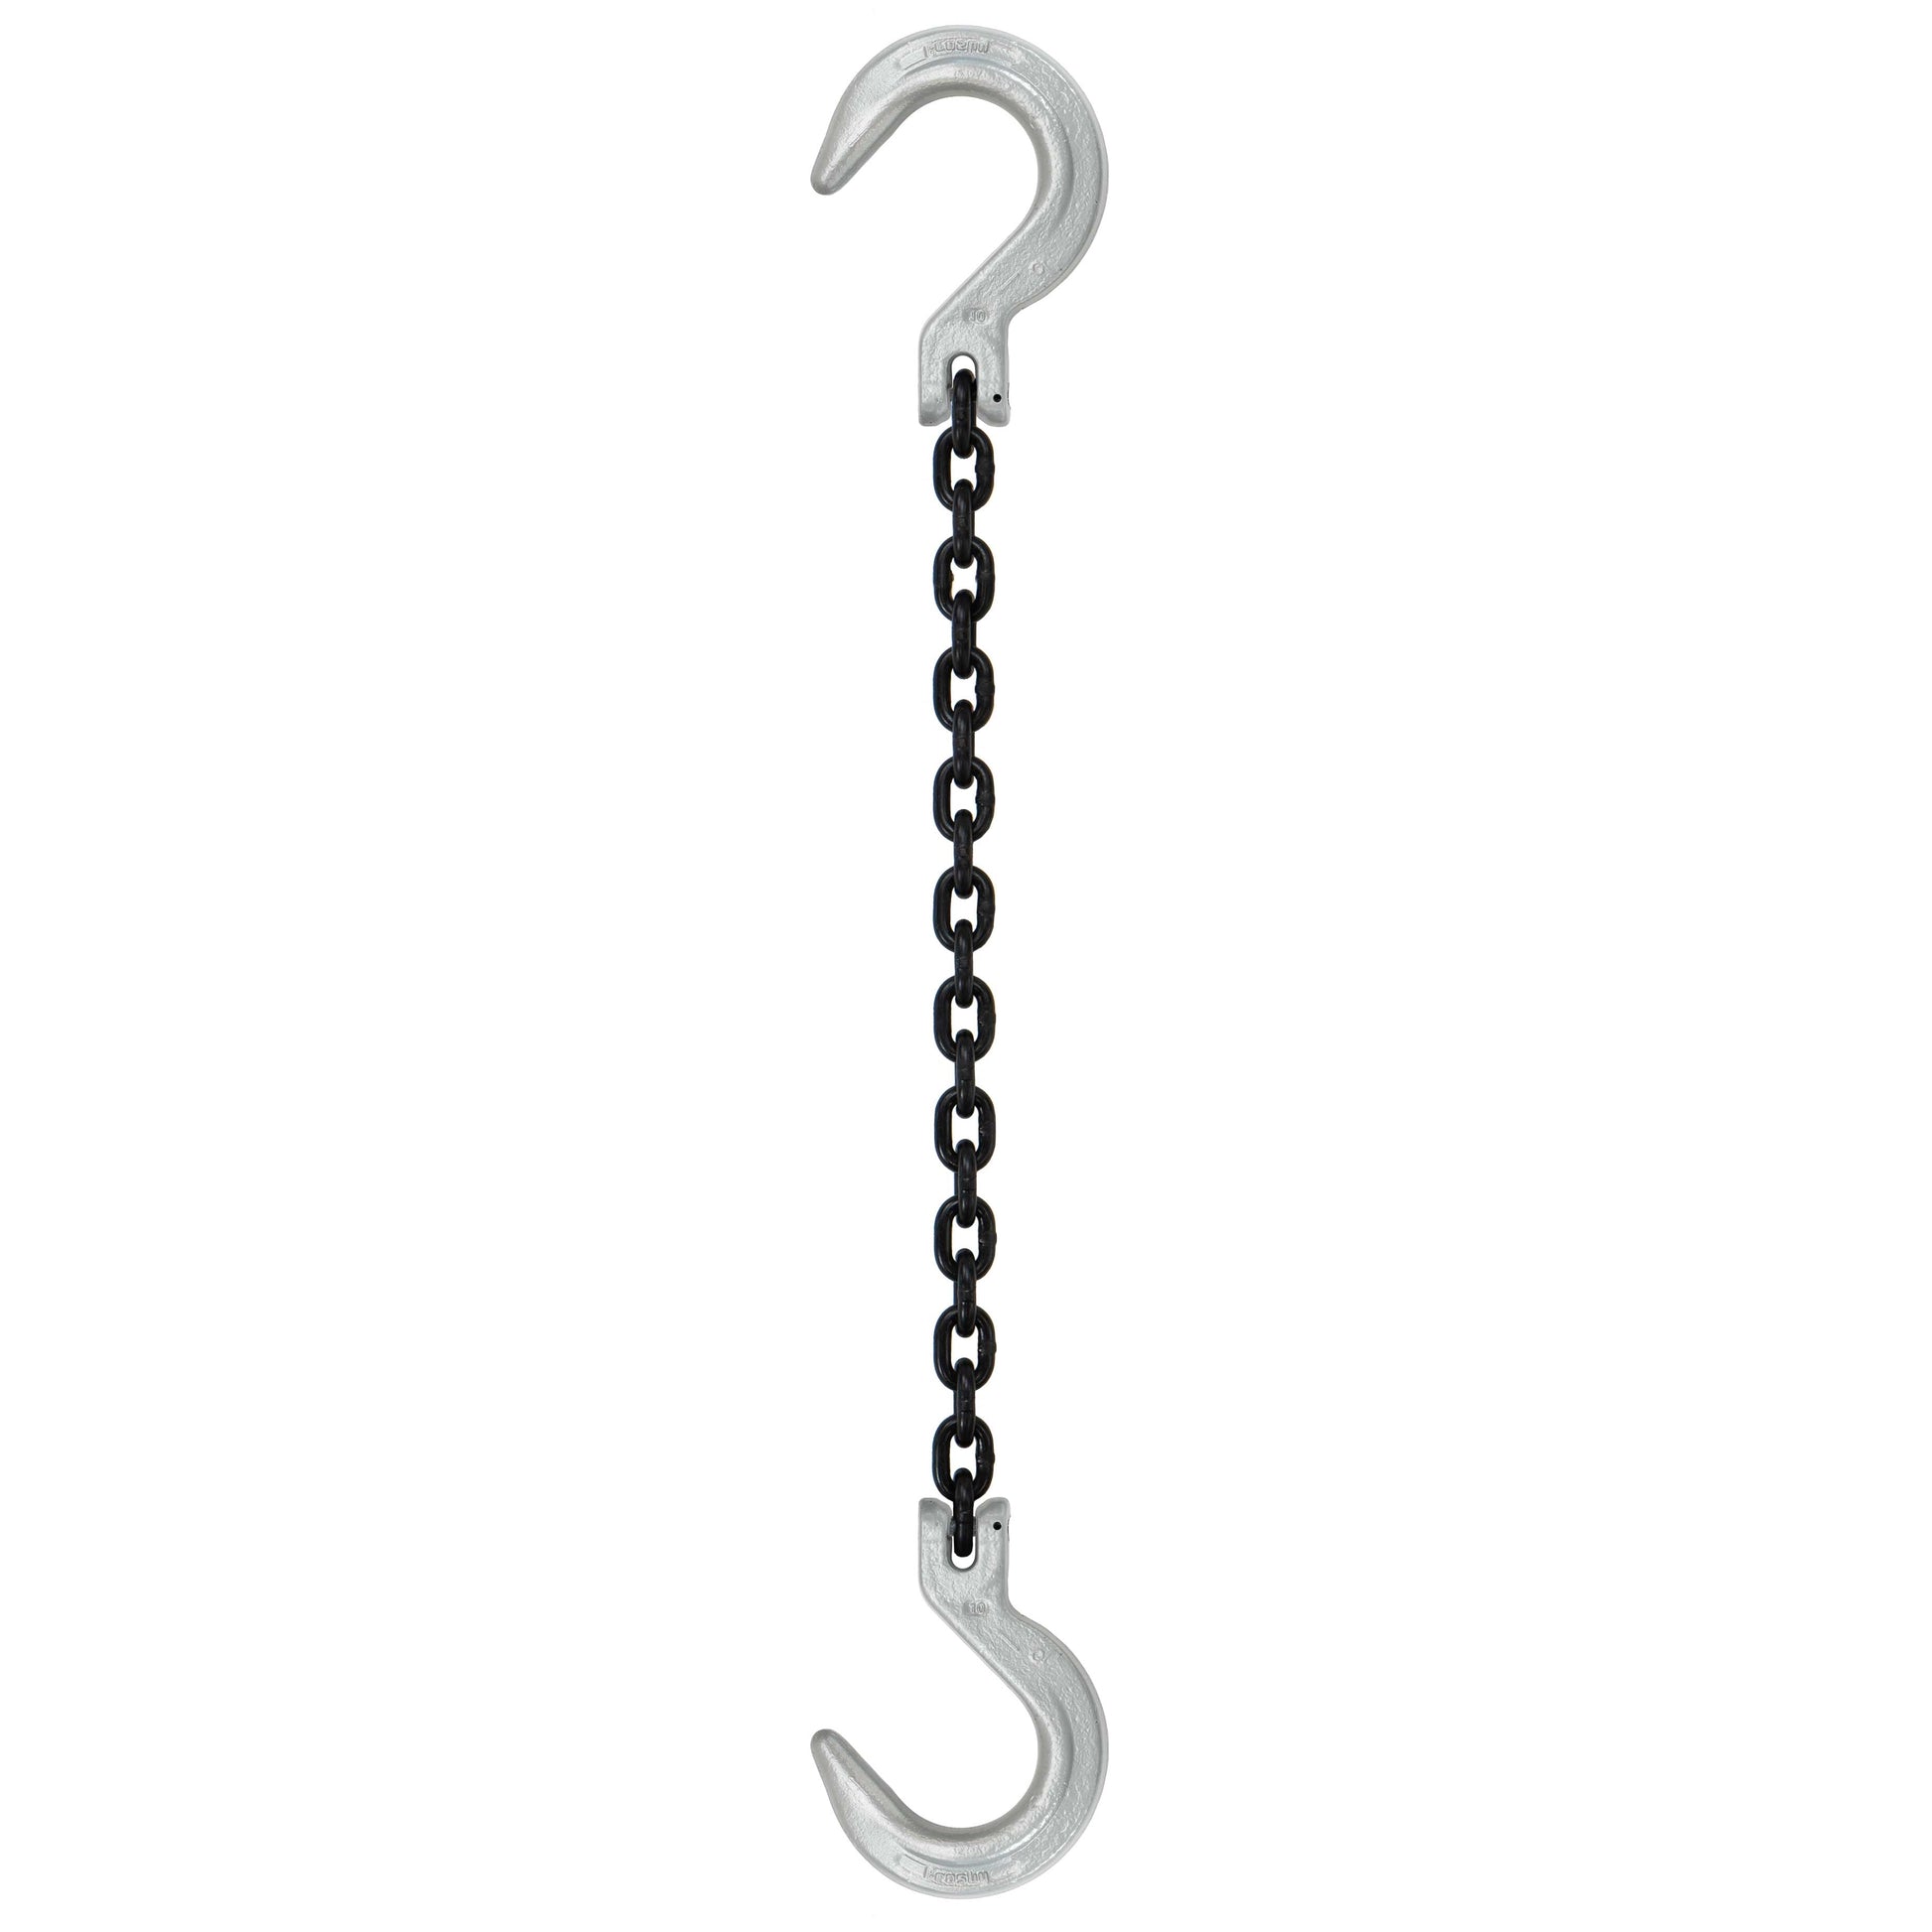 516 inch x 8 foot Domestic Single Leg Chain Sling w Crosby Foundry & Foundry Hooks Grade 100 image 1 of 2